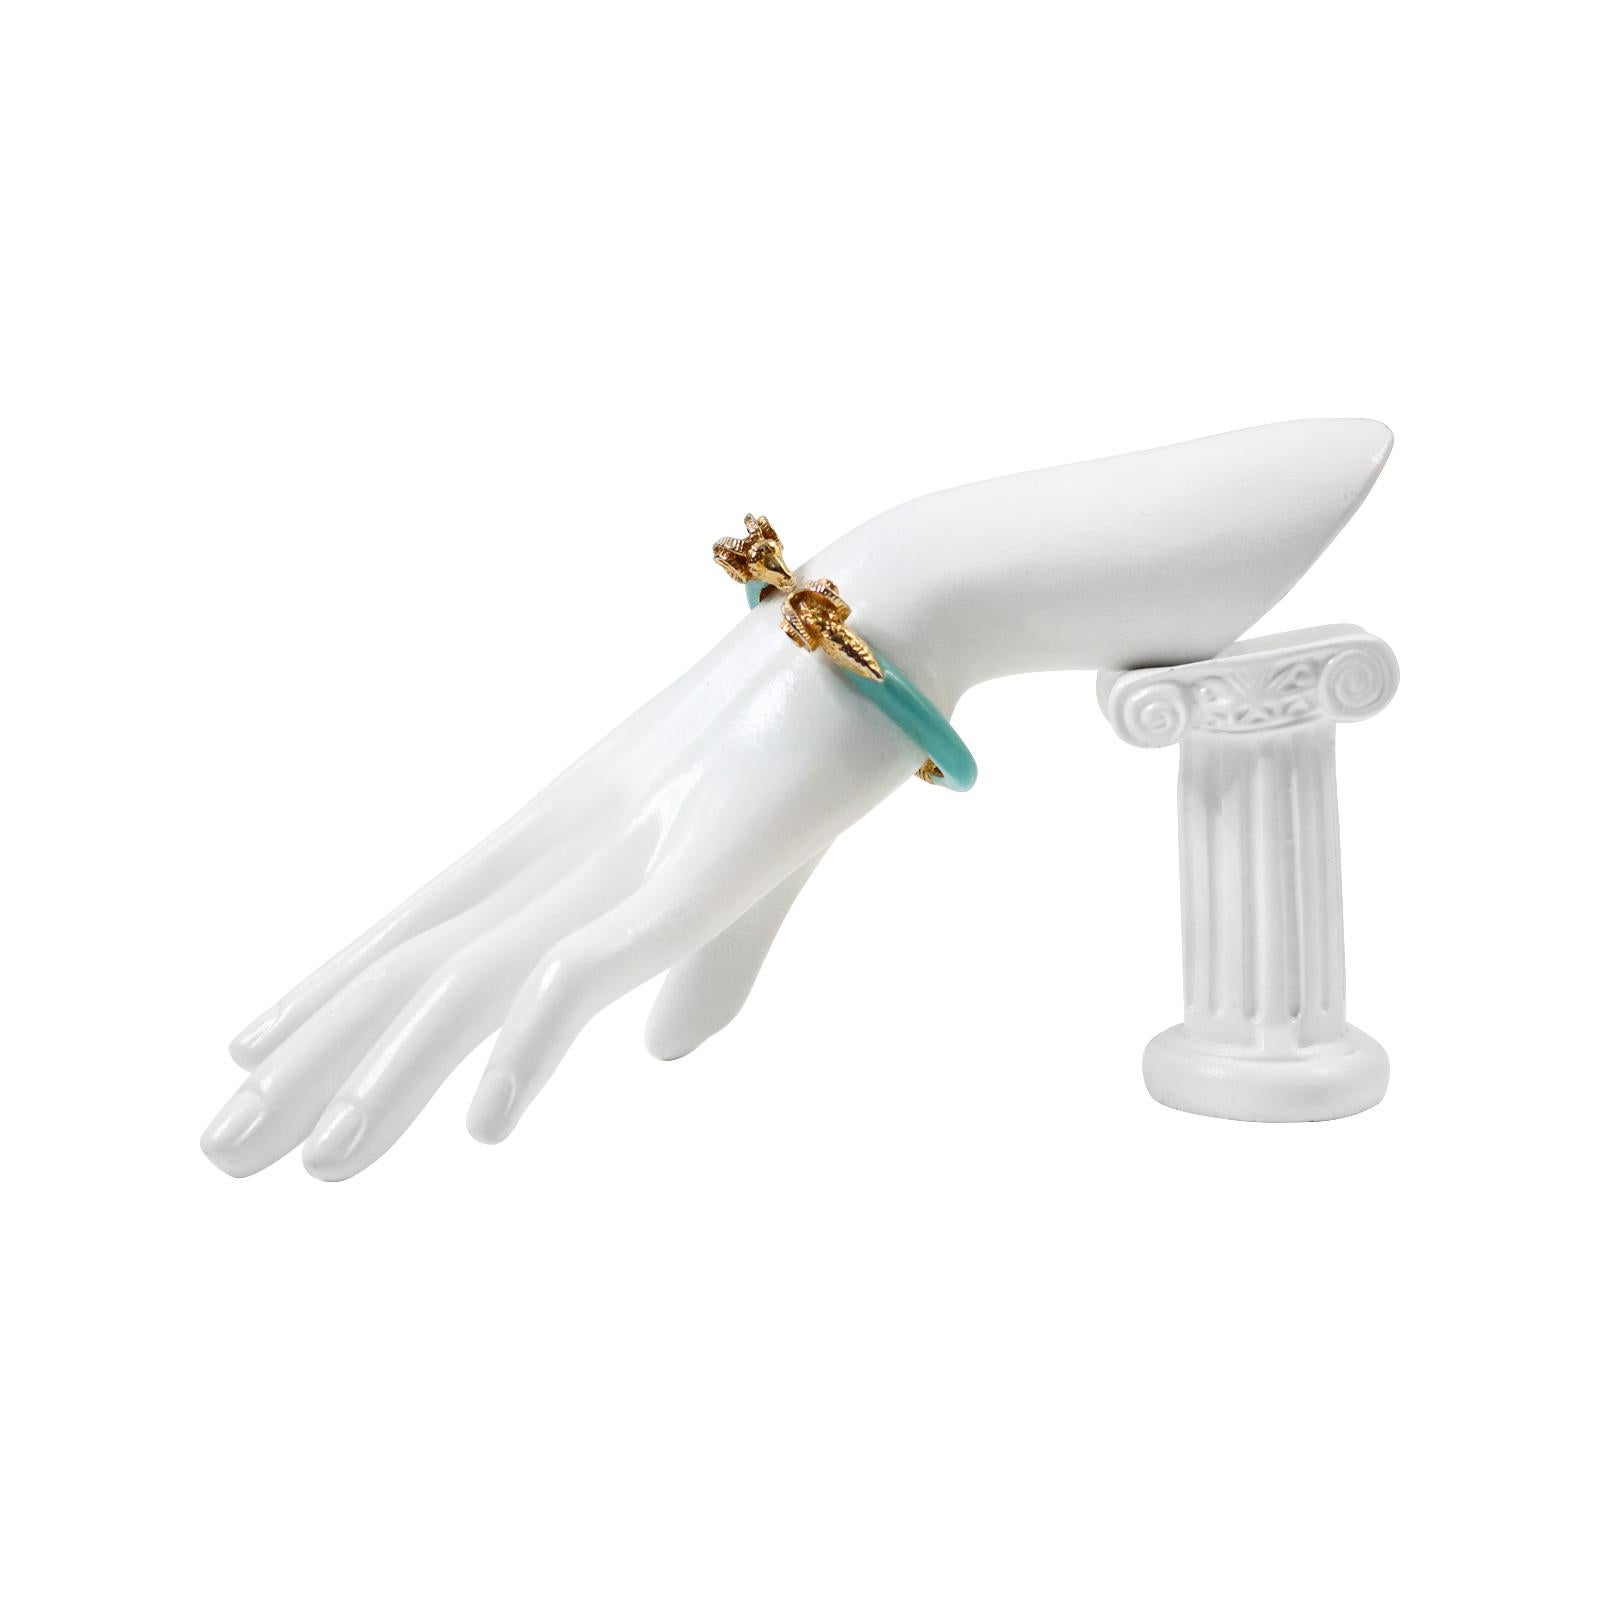 Art Deco Vintage Donald Stannard Rams Head Bracelet in Turquoise and Gold Circa 1980s For Sale